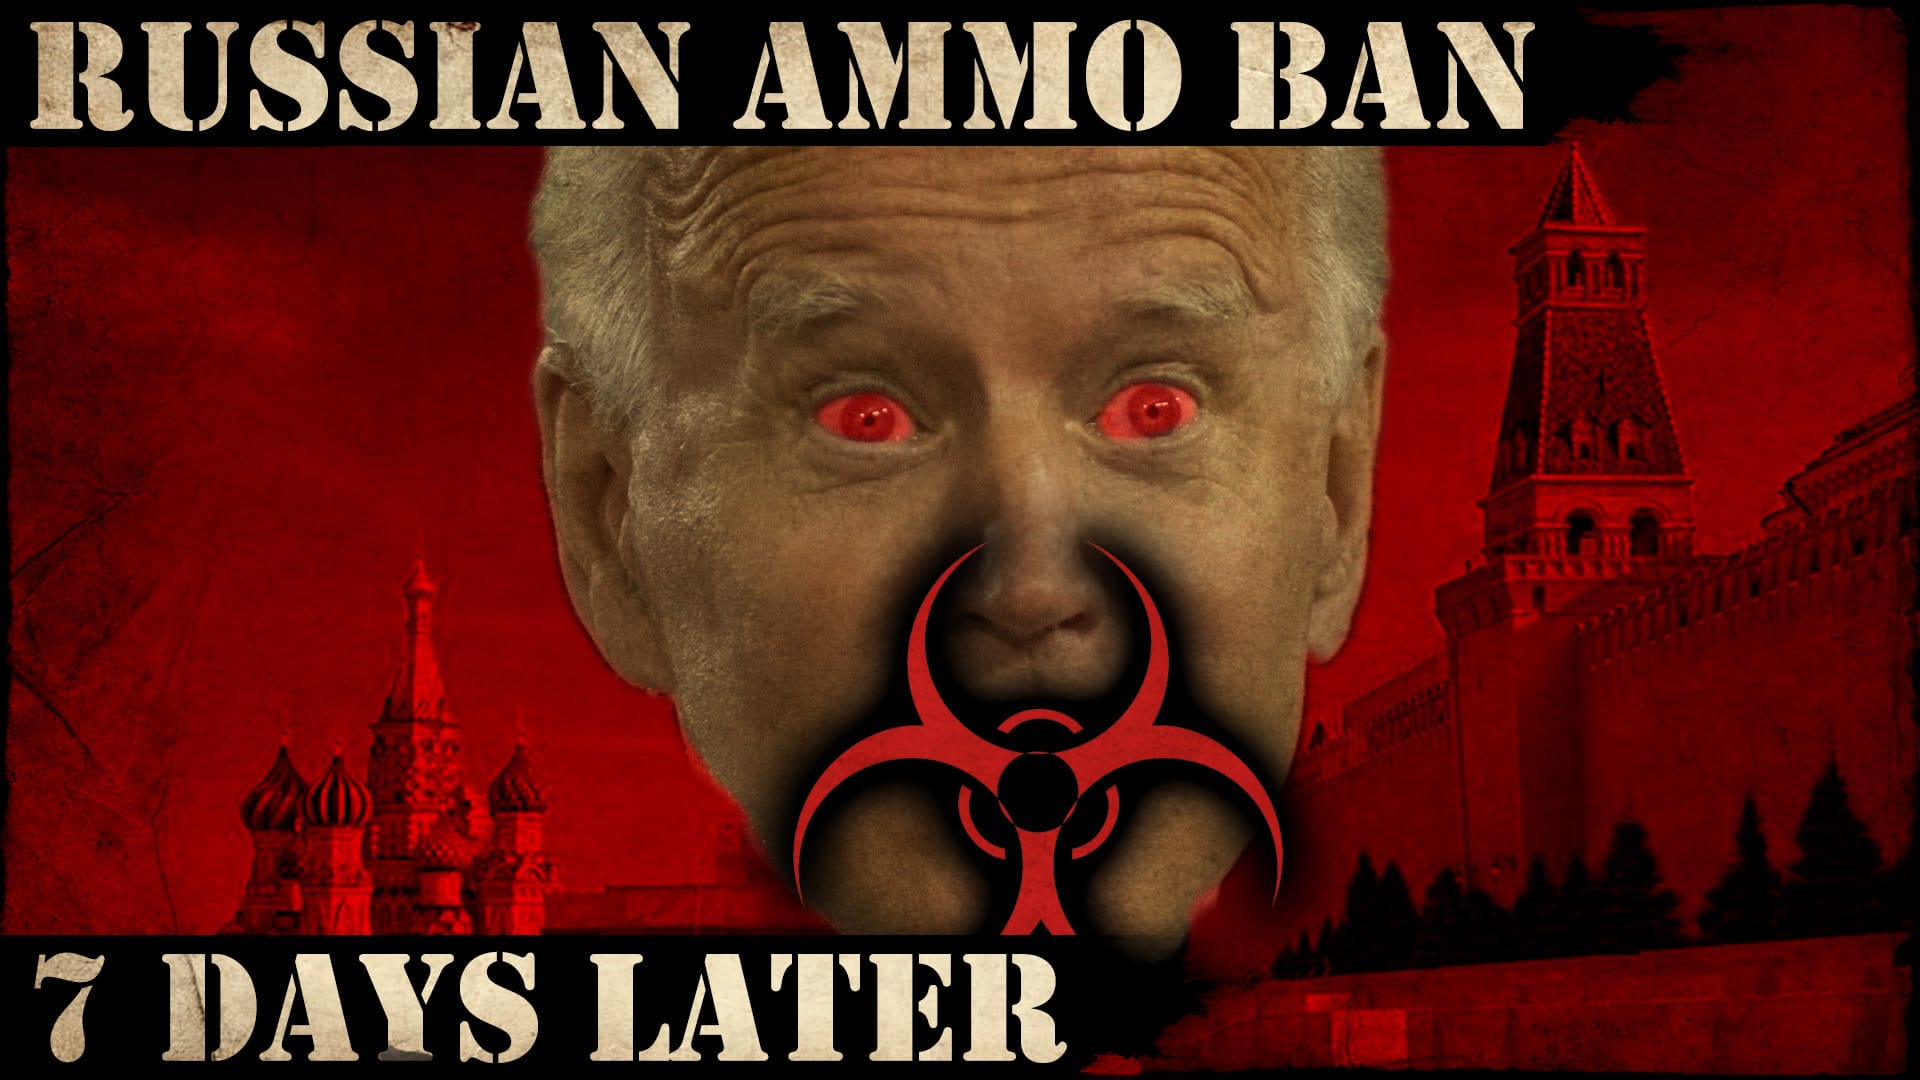 Russian Ammo Ban – 7 Days Later